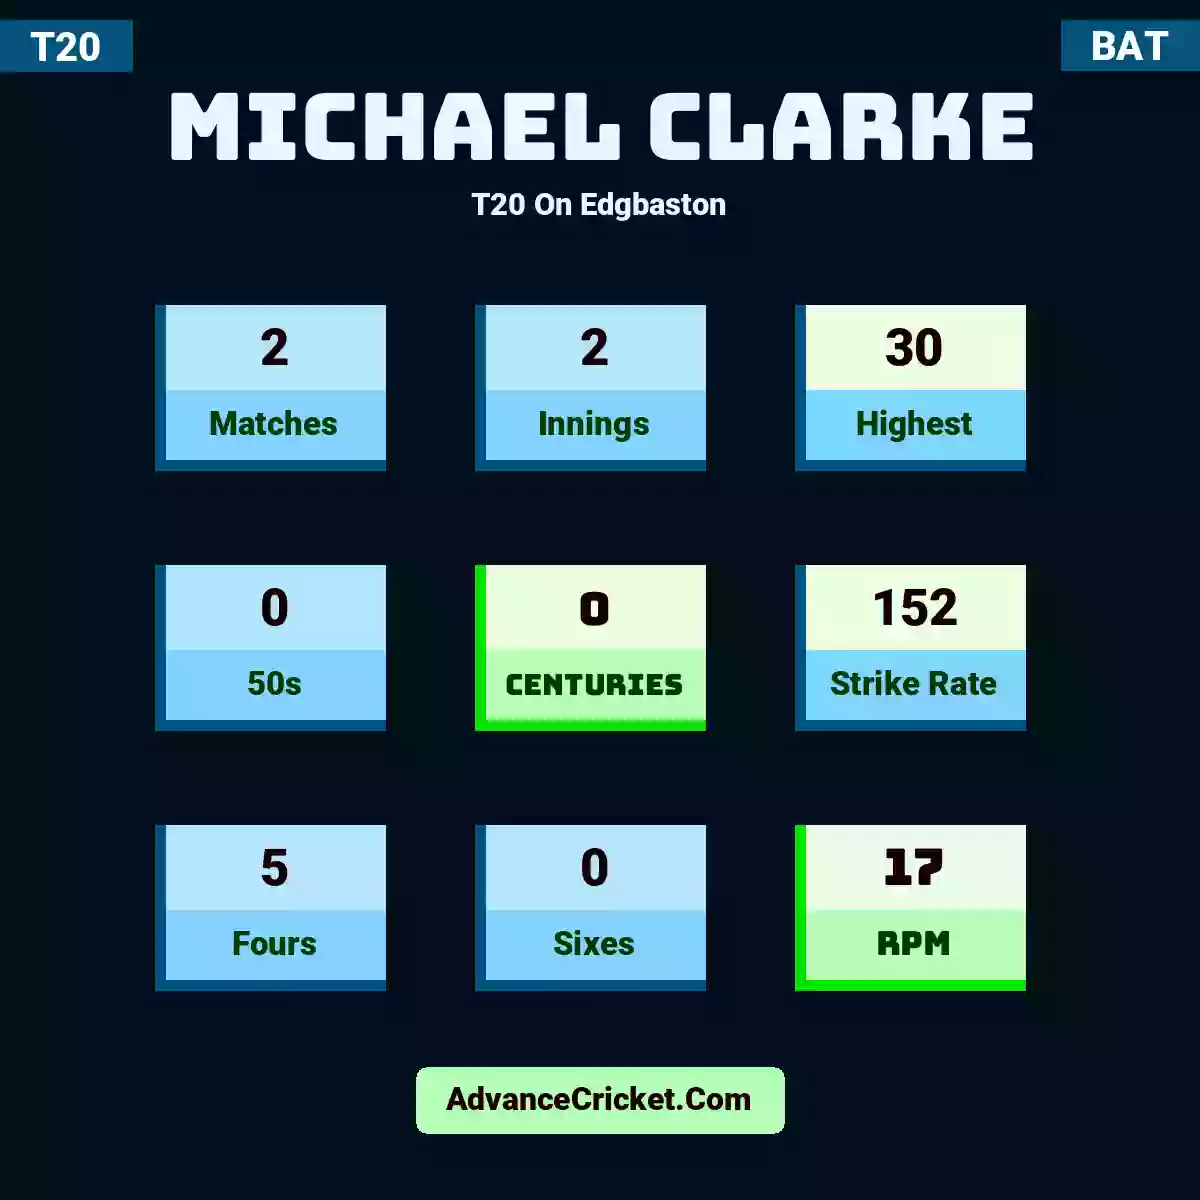 Michael Clarke T20  On Edgbaston, Michael Clarke played 2 matches, scored 30 runs as highest, 0 half-centuries, and 0 centuries, with a strike rate of 152. M.Clarke hit 5 fours and 0 sixes, with an RPM of 17.